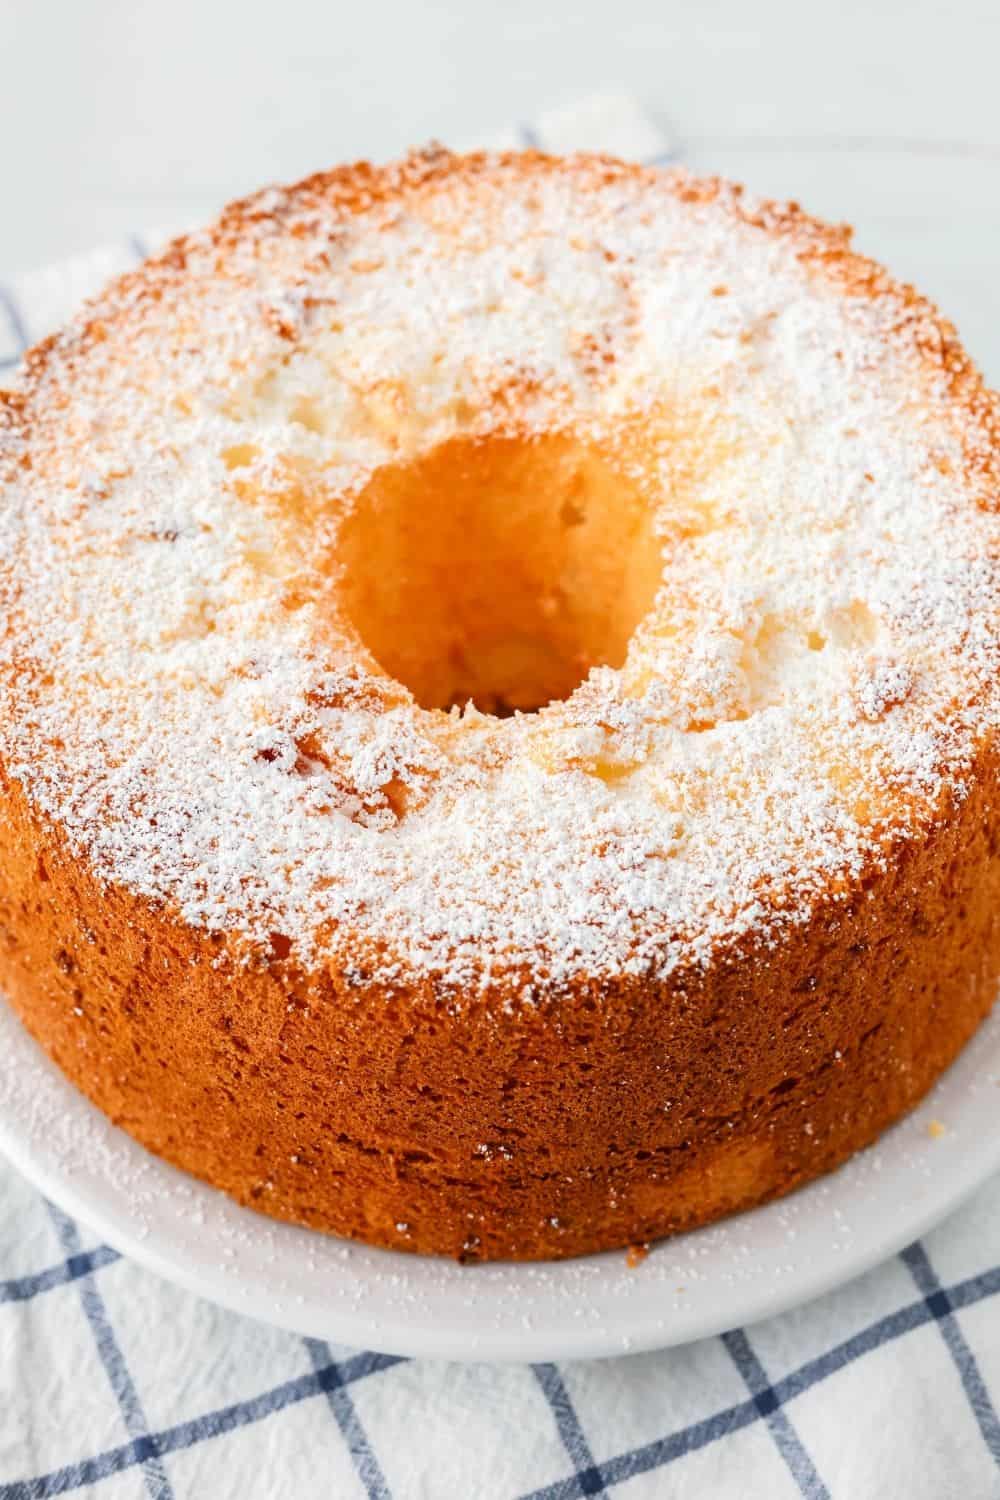 whole angel food cake made from a cake mix, served on a white plate and dusted with powdered sugar.